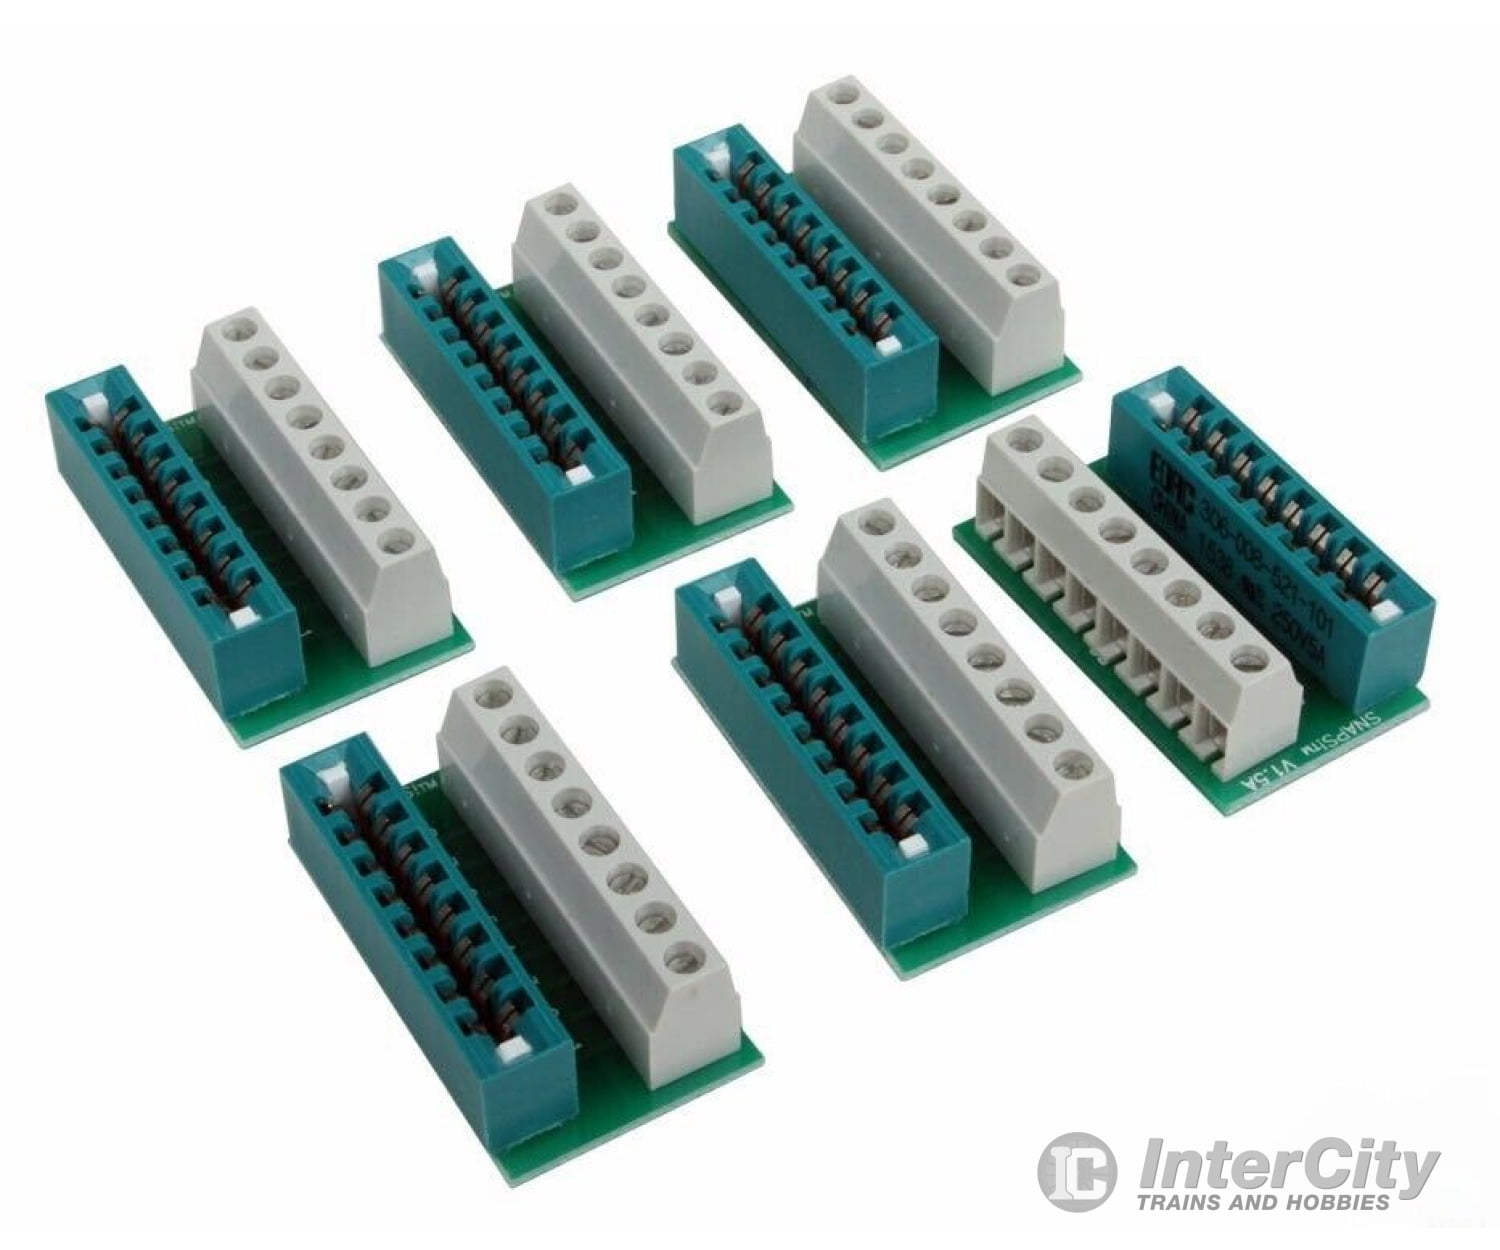 Accu Lites 10006 Snaps! Wiring Connector For Tortoise Switch Machine 6 - Pack - - 2020 Update With